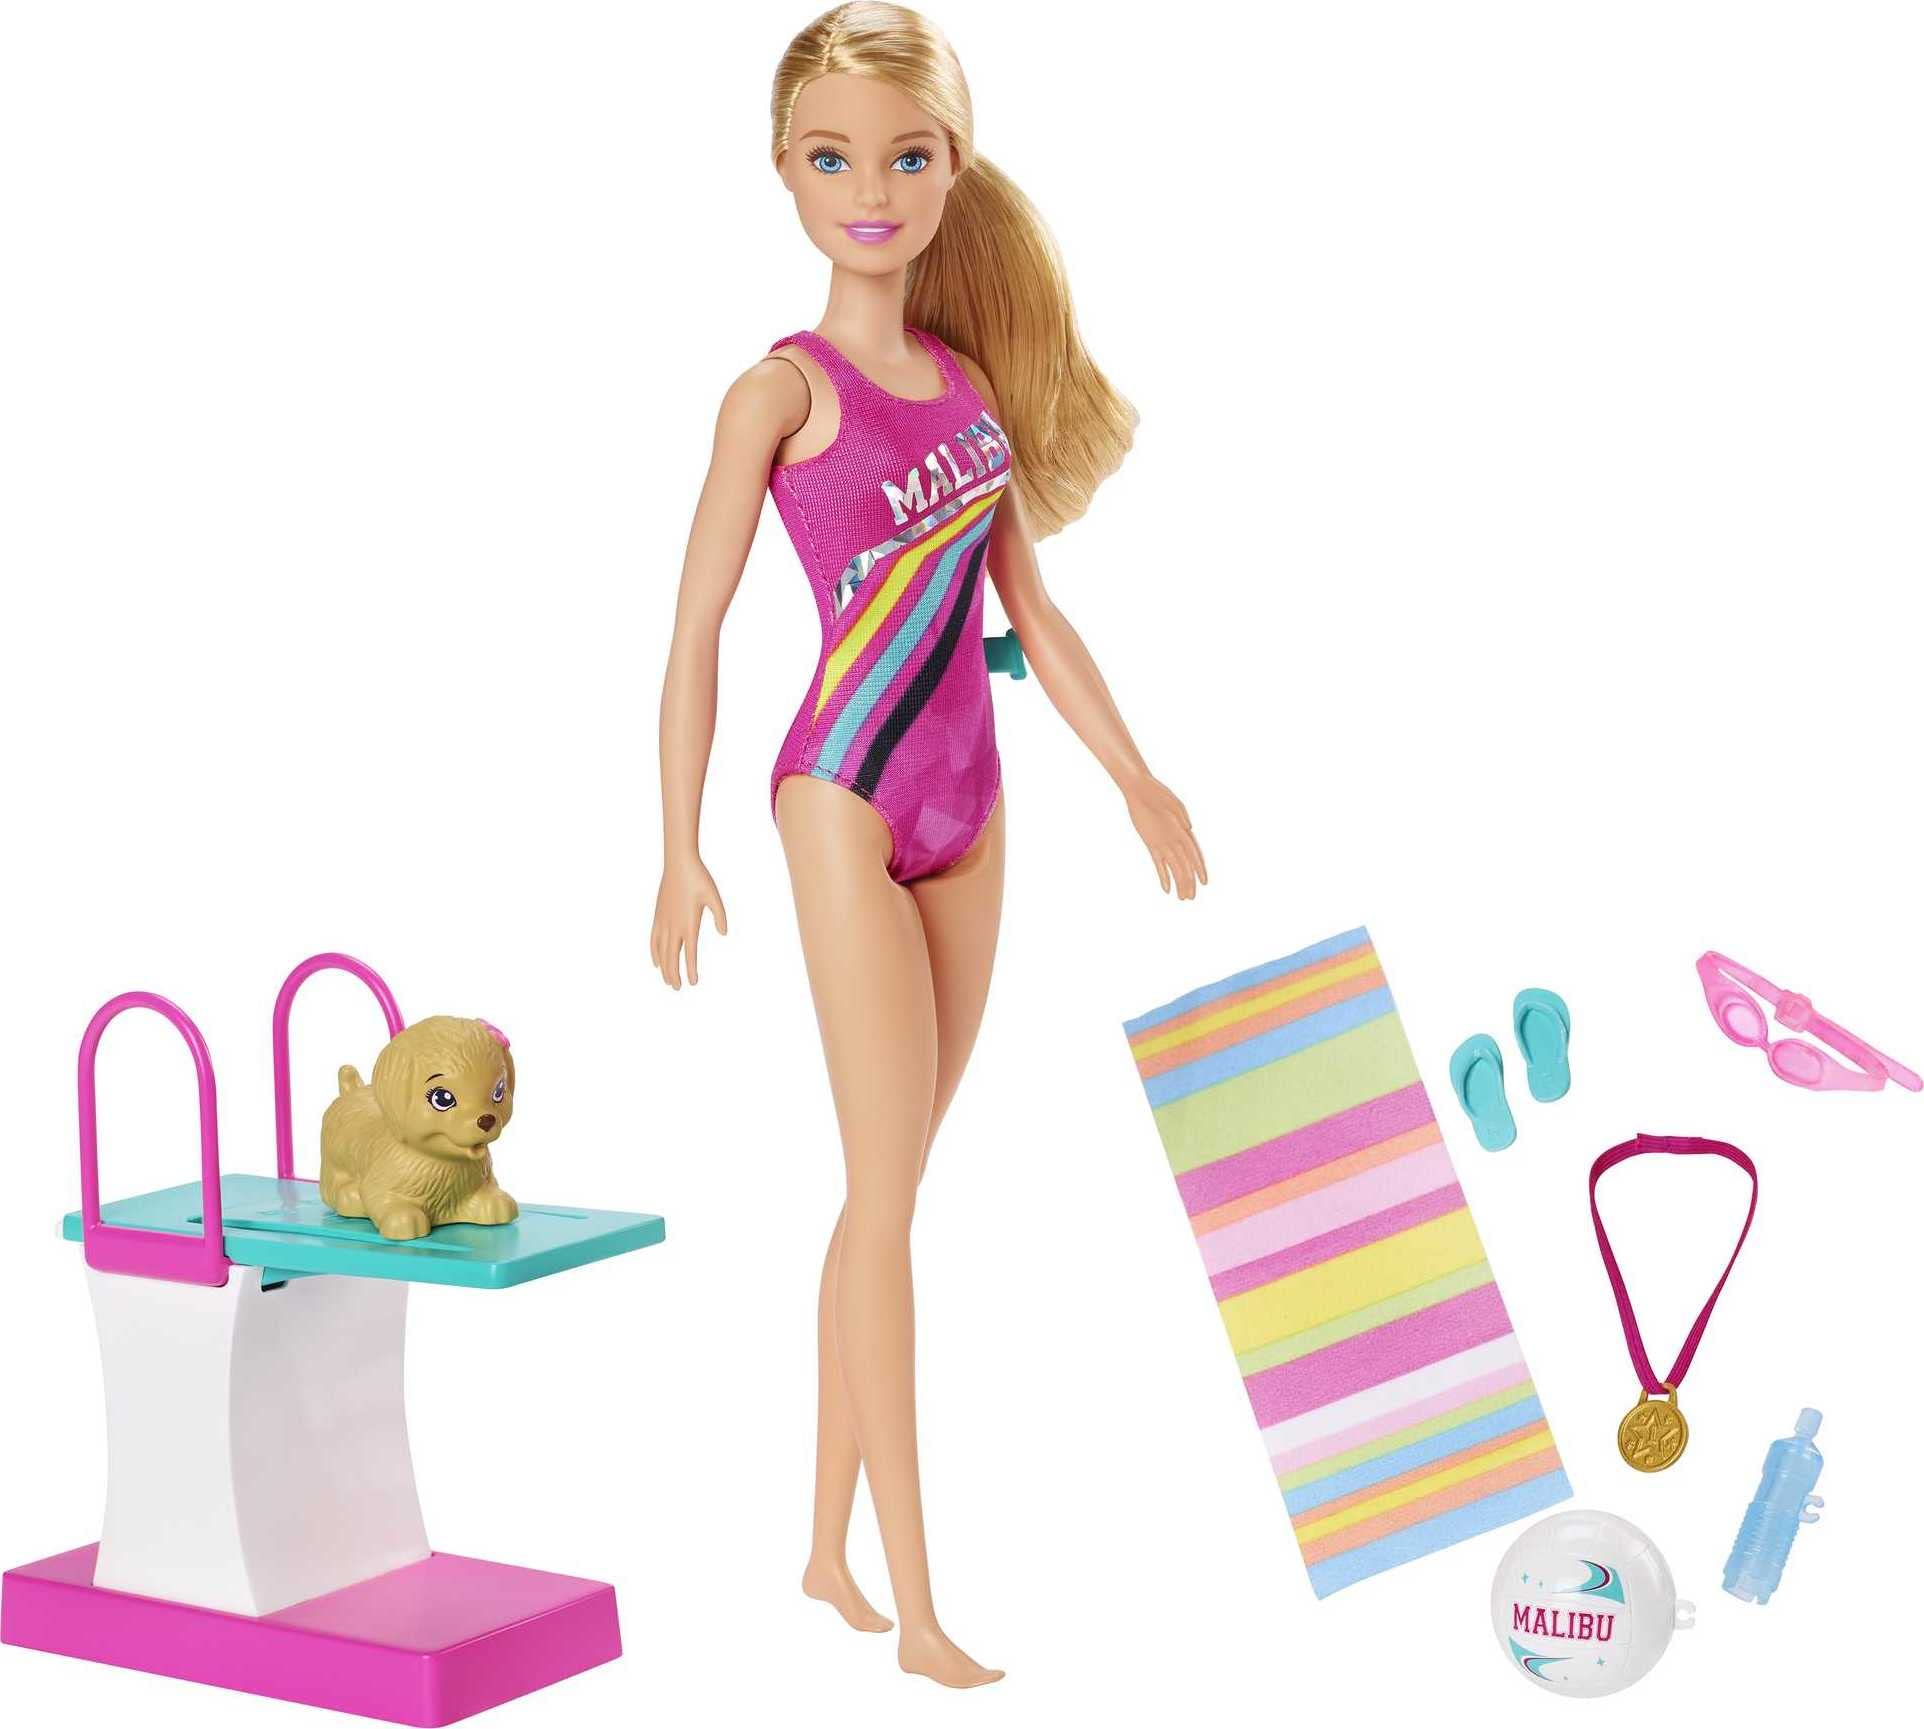 Barbie Dreamhouse Adventures Swim 'n Dive Doll, 11.5-Inch, in Swimwear, with Swimming Feature, Diving Board and Puppy, Gift for 3 to 7 Year Olds